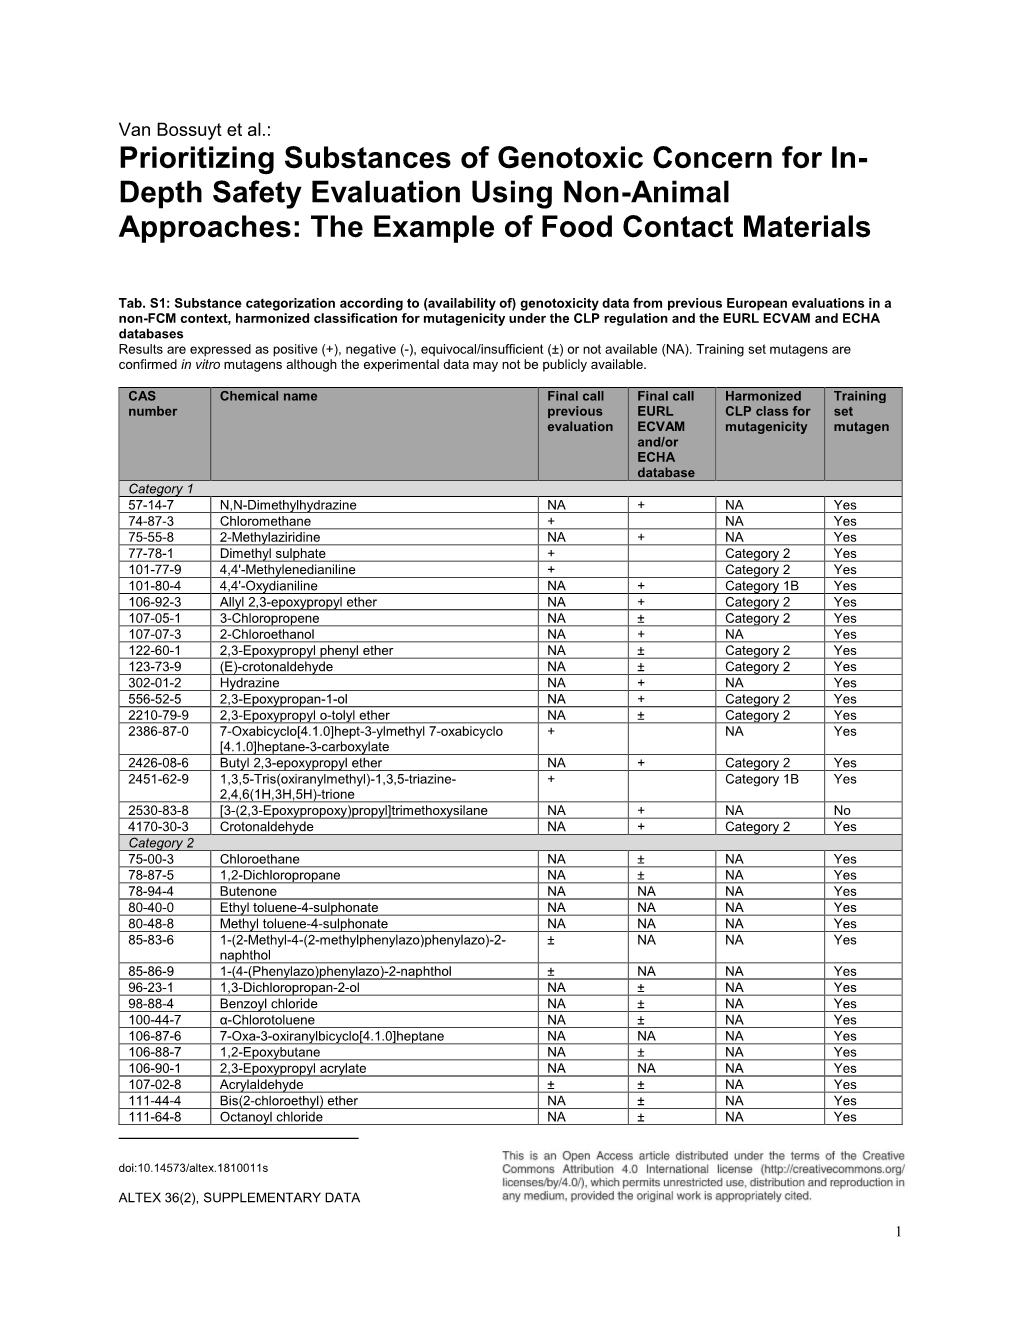 Prioritizing Substances of Genotoxic Concern for In- Depth Safety Evaluation Using Non-Animal Approaches: the Example of Food Contact Materials 1